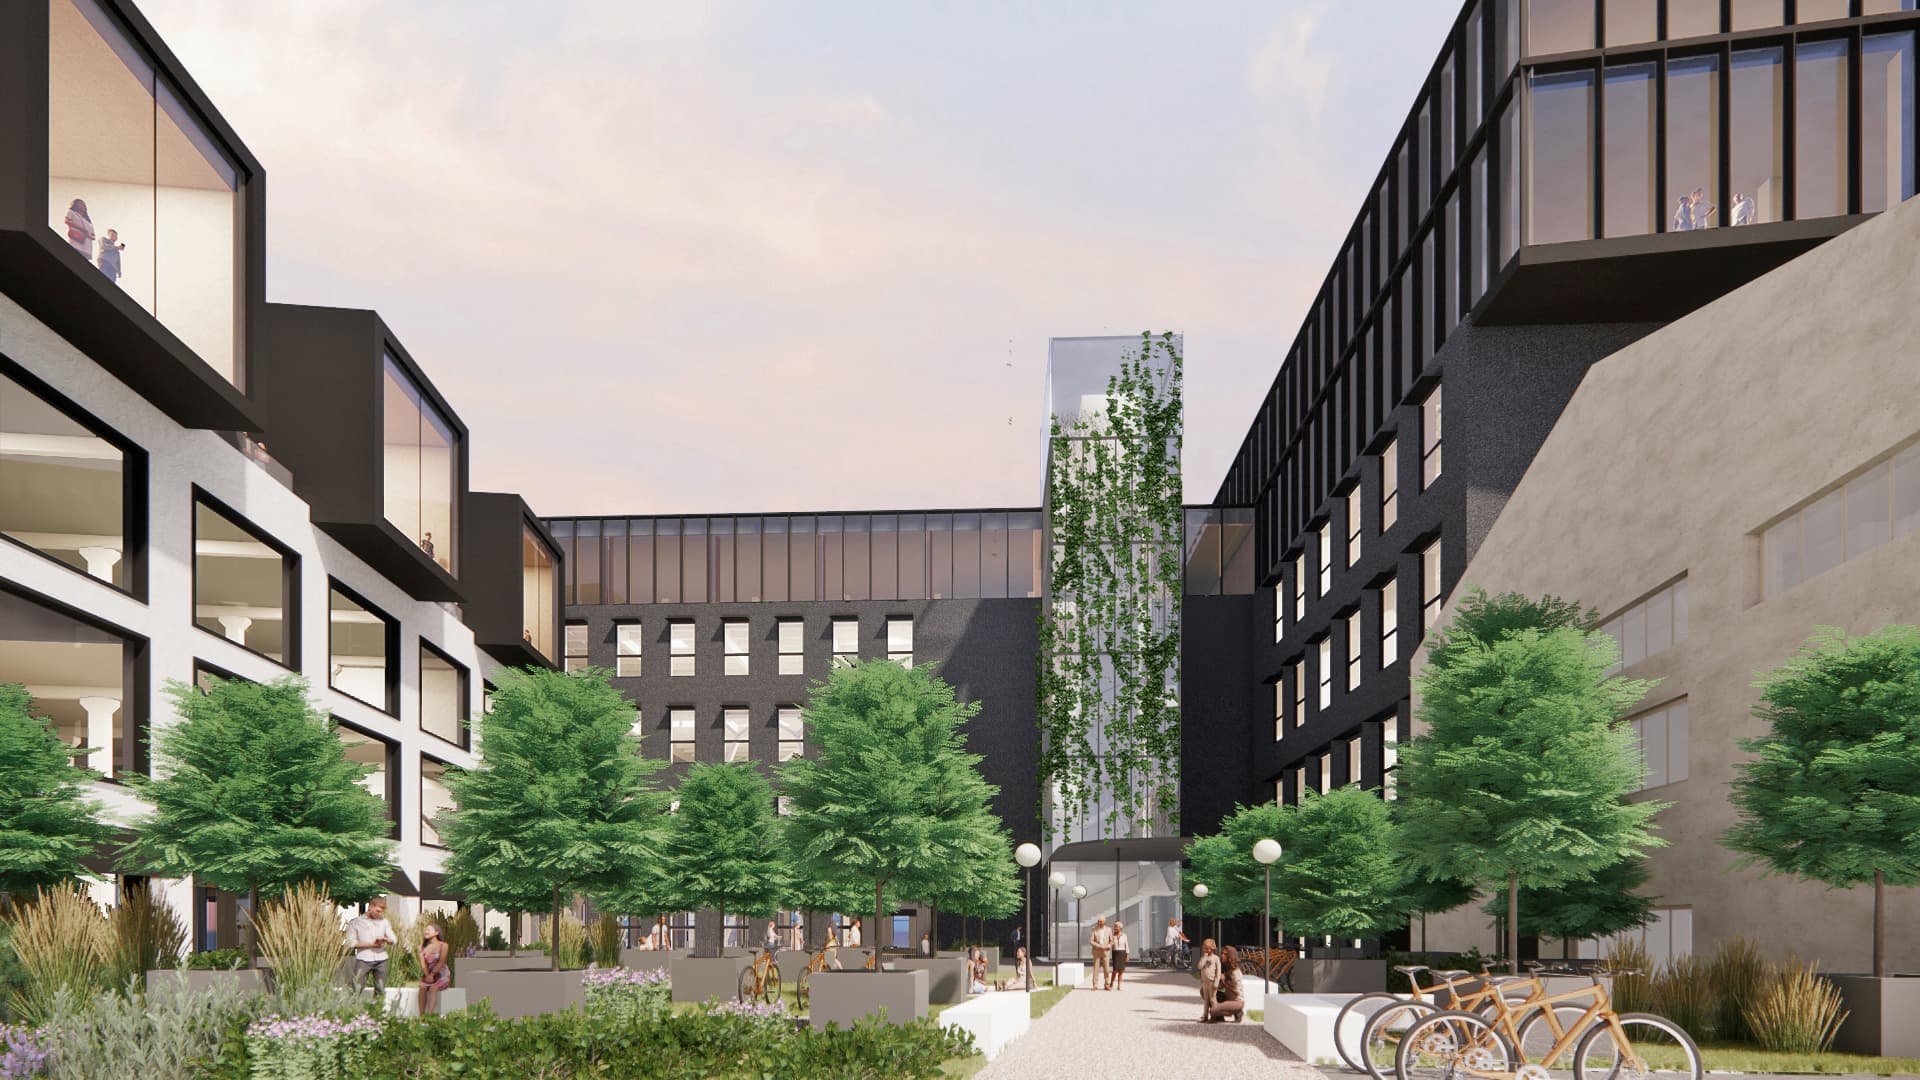 Lithuania building a $110 million tech campus — the largest in Europe